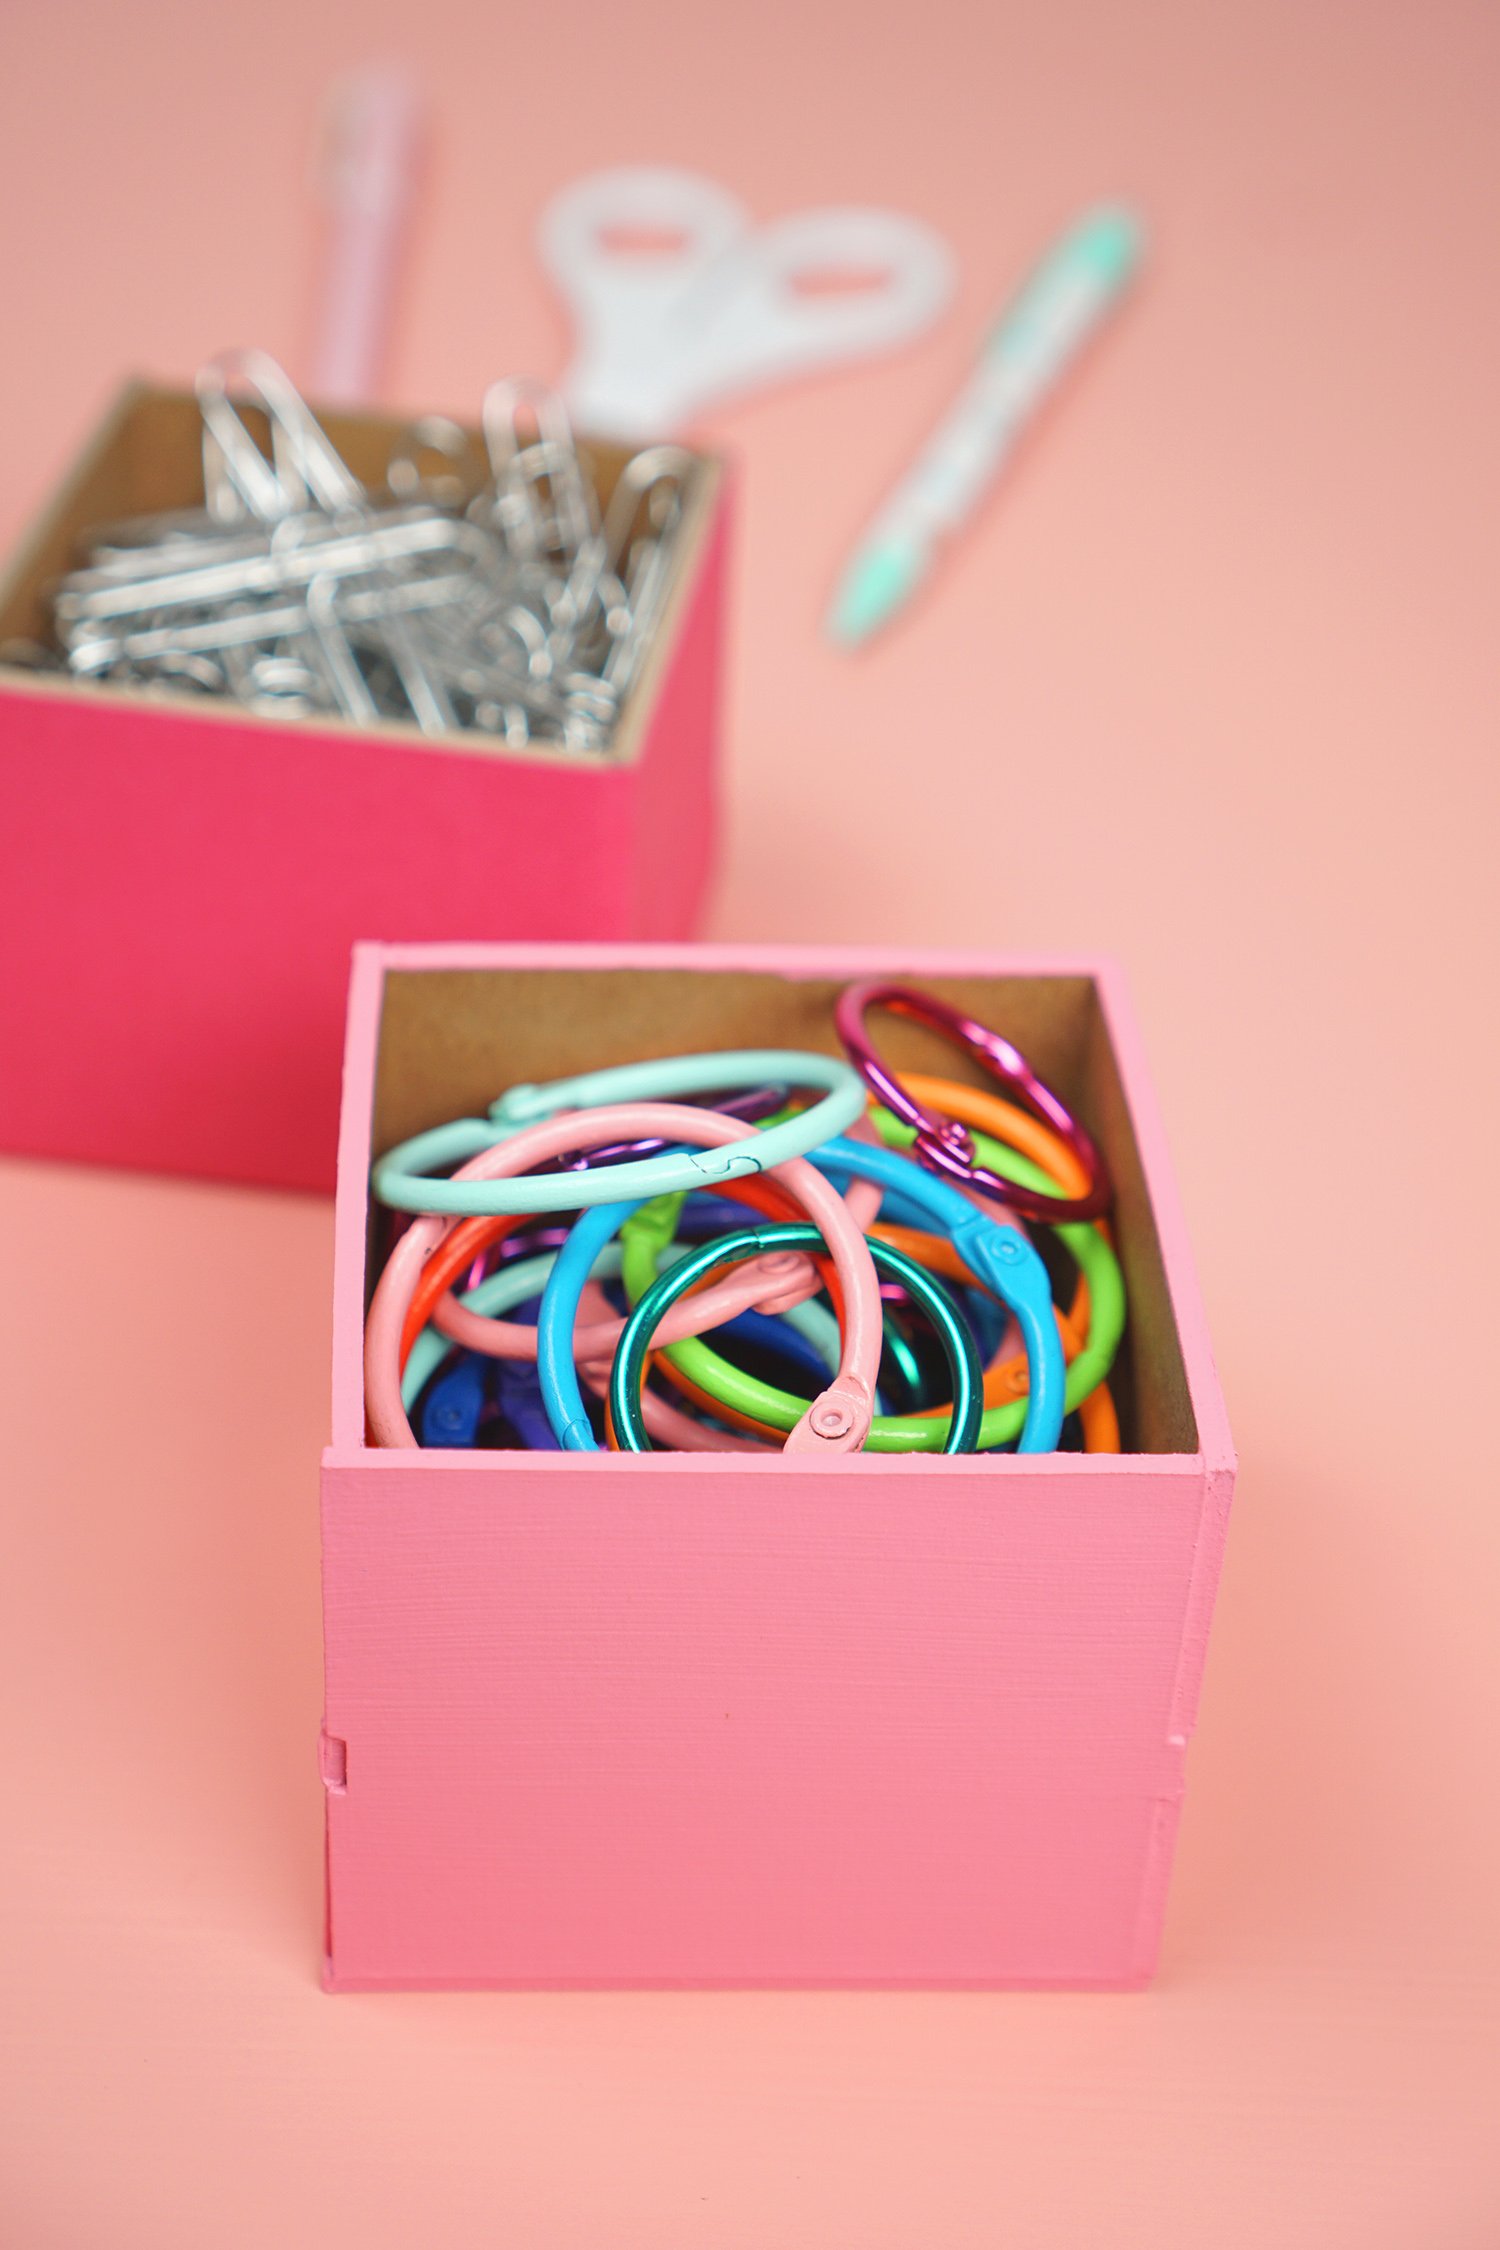 Pink desk organizer box filled with colorful binder rings and office supplies